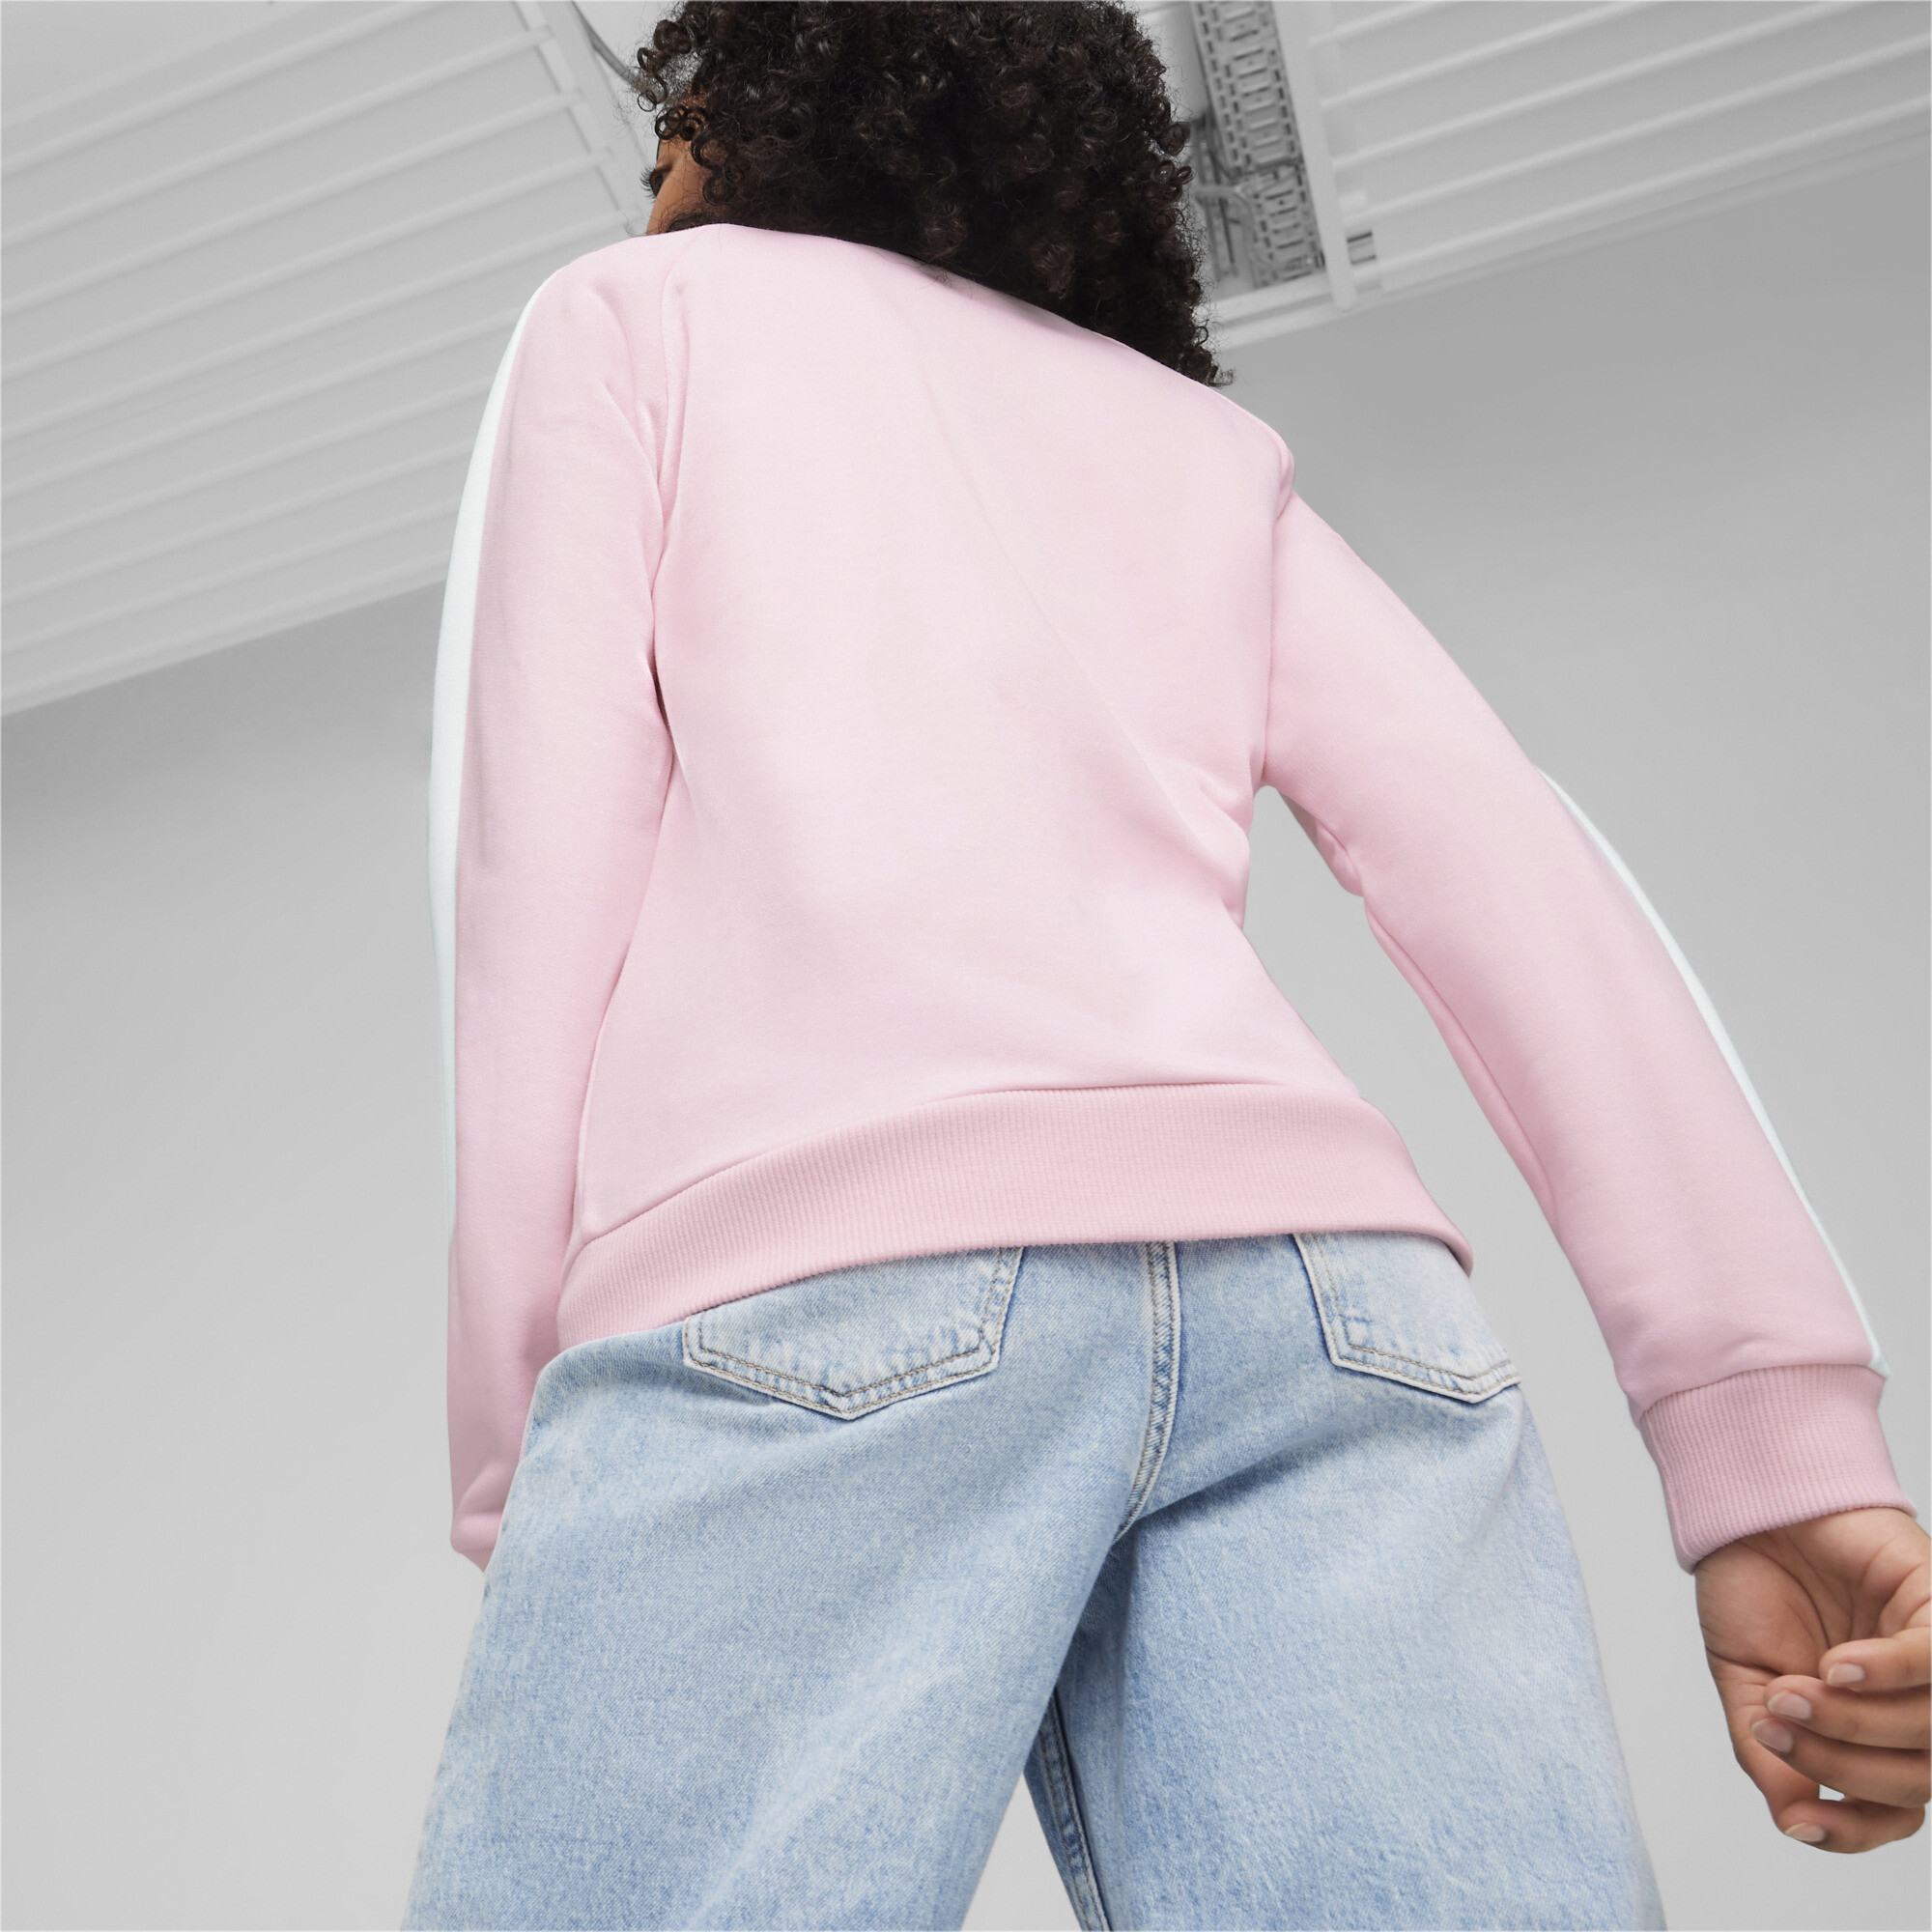 PUMA Classics T7 Track Jacket In Pink, Size 9-10 Youth